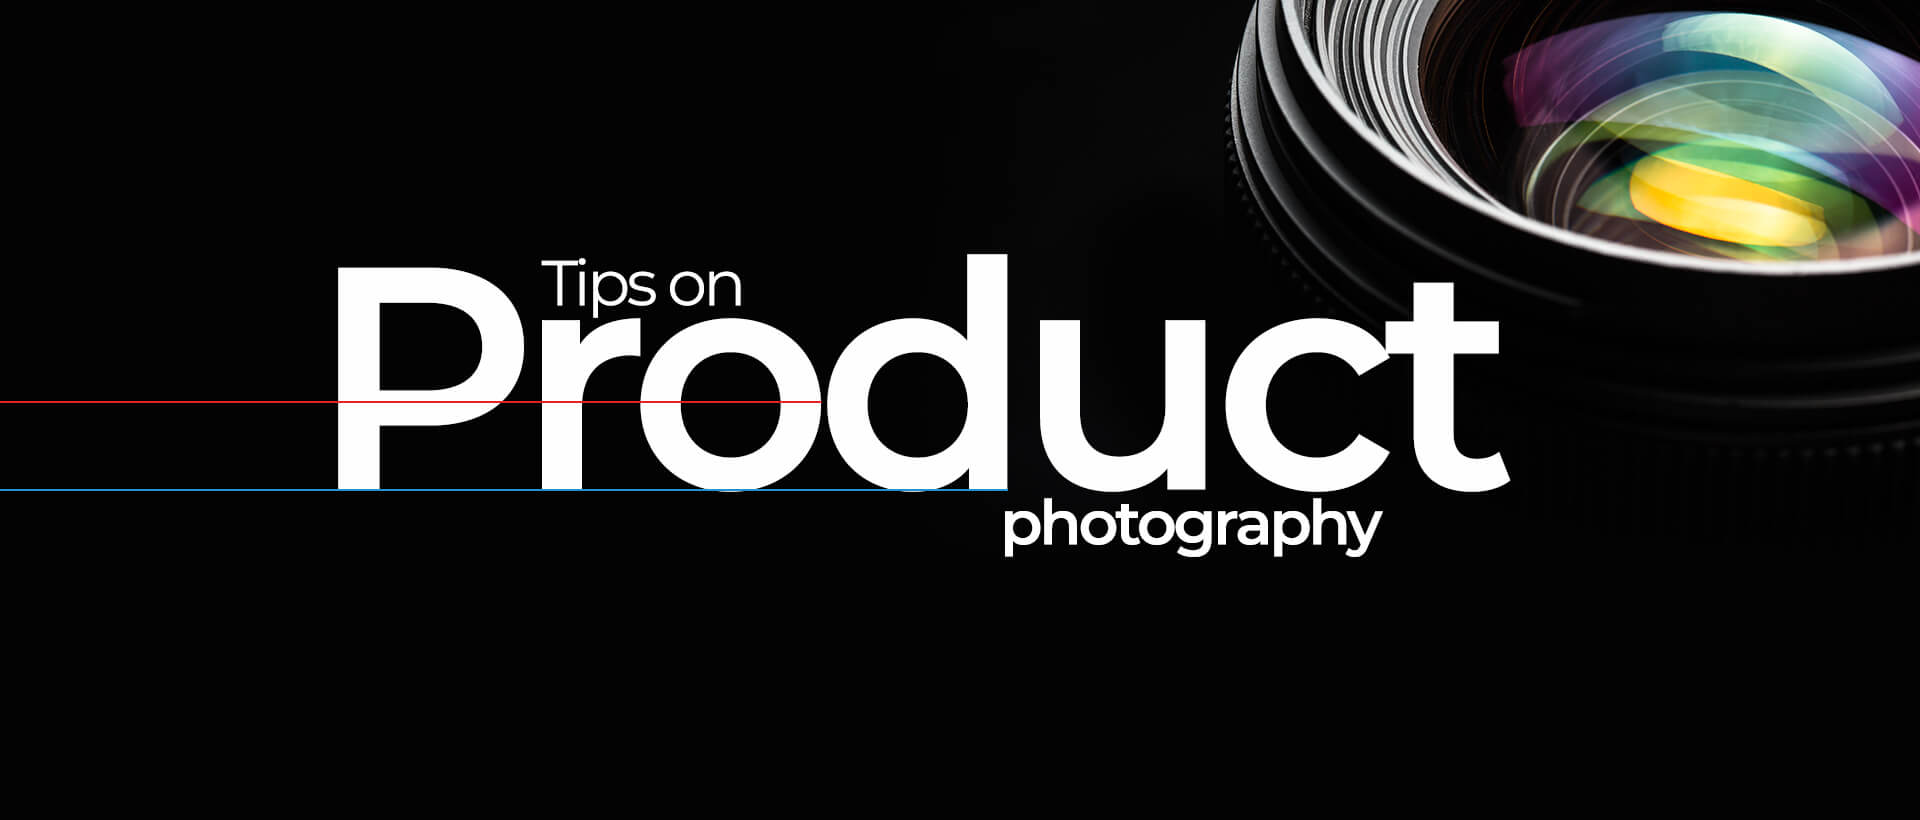 Tips on product photography